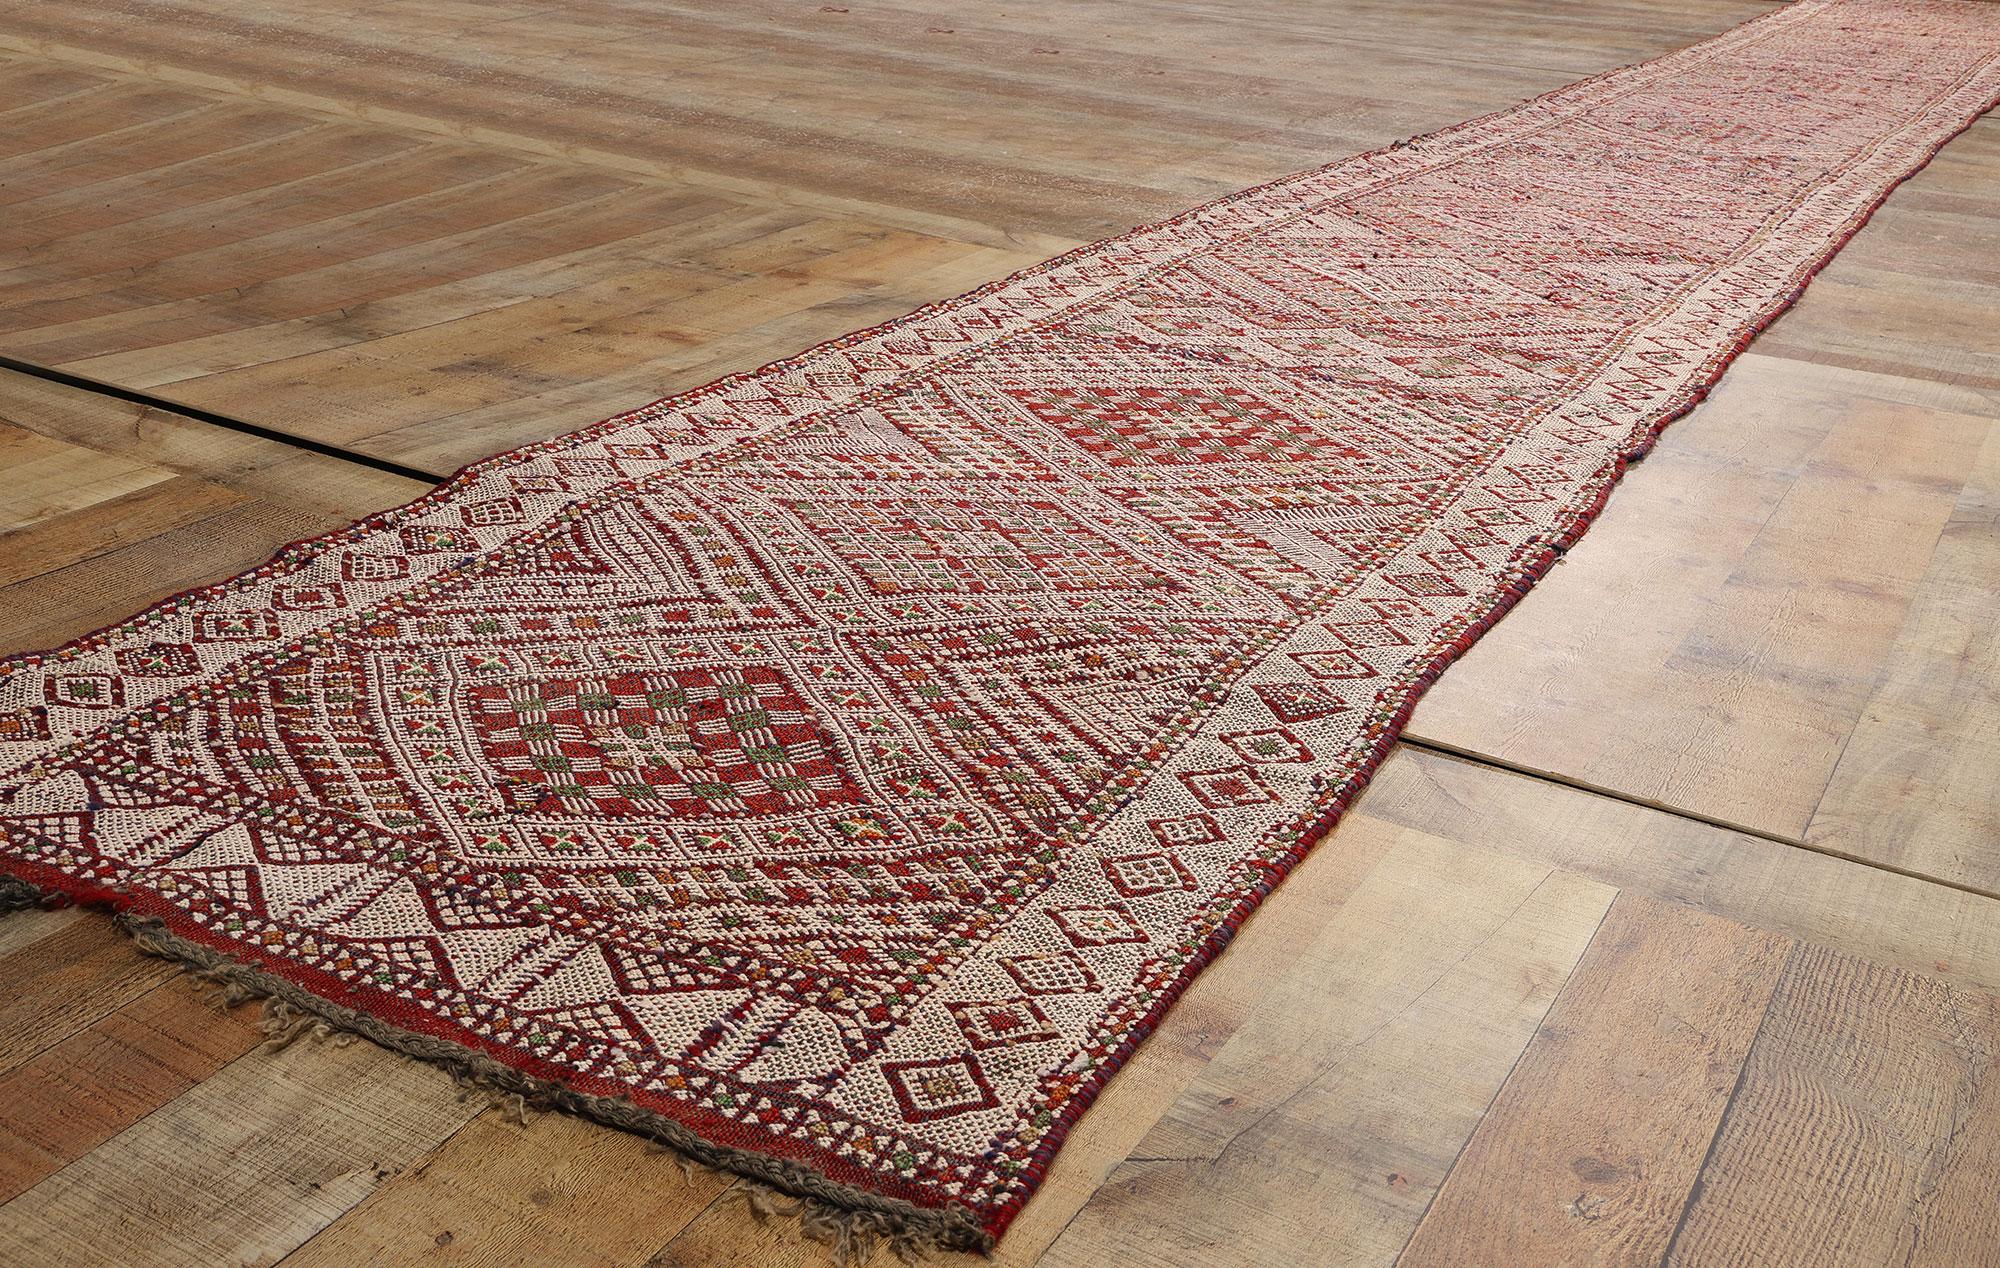 Hand-Woven Midcentury Bohemian Vintage Moroccan Zemmour Kilim Berber Rug, 02'09 x 23'10 For Sale